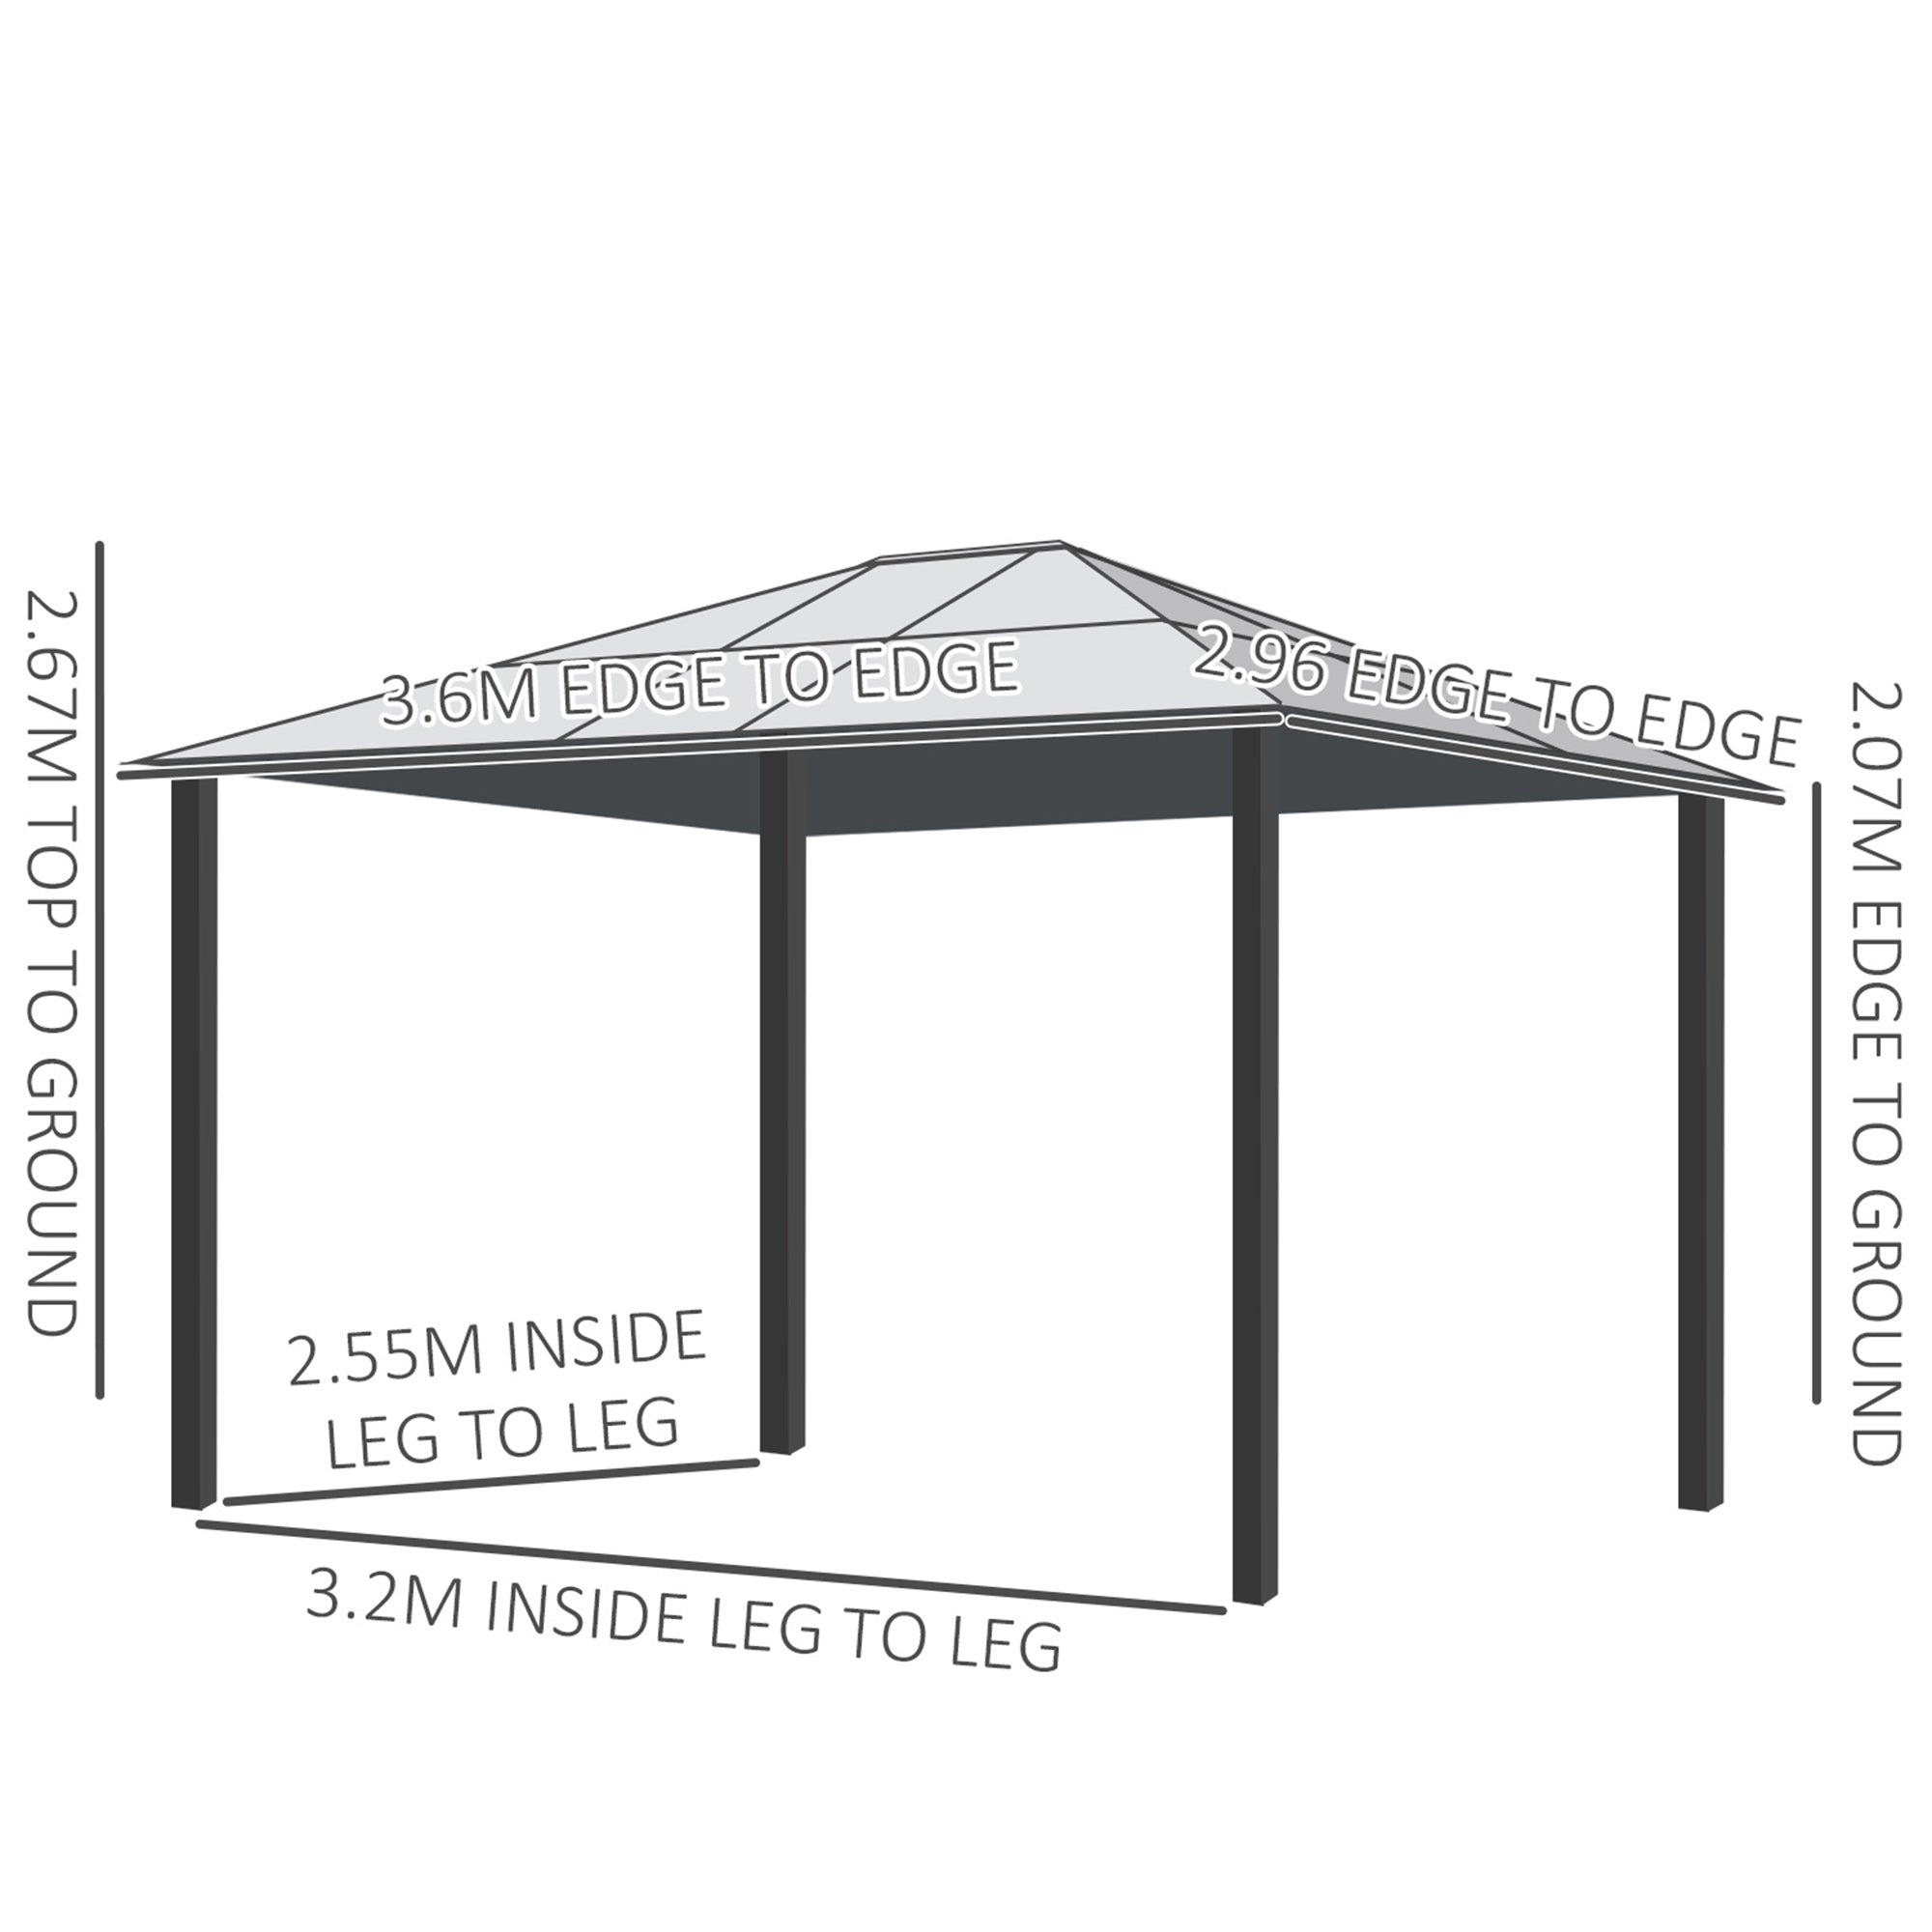 3 x 3.6 m Hardtop Gazebo Canopy with Polycarbonate Roof, Aluminium and Steel Frame, Nettings and Sidewalls for Garden, Patio, Khaki-2